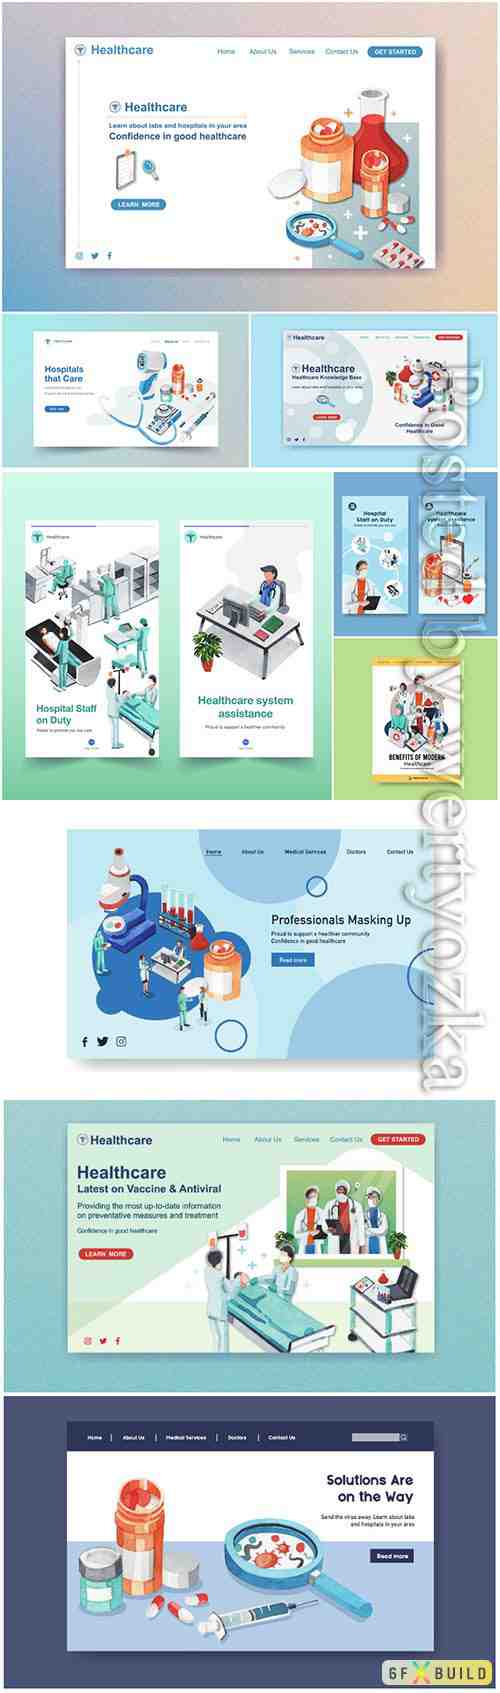 Healthcare website template design with medical equipment